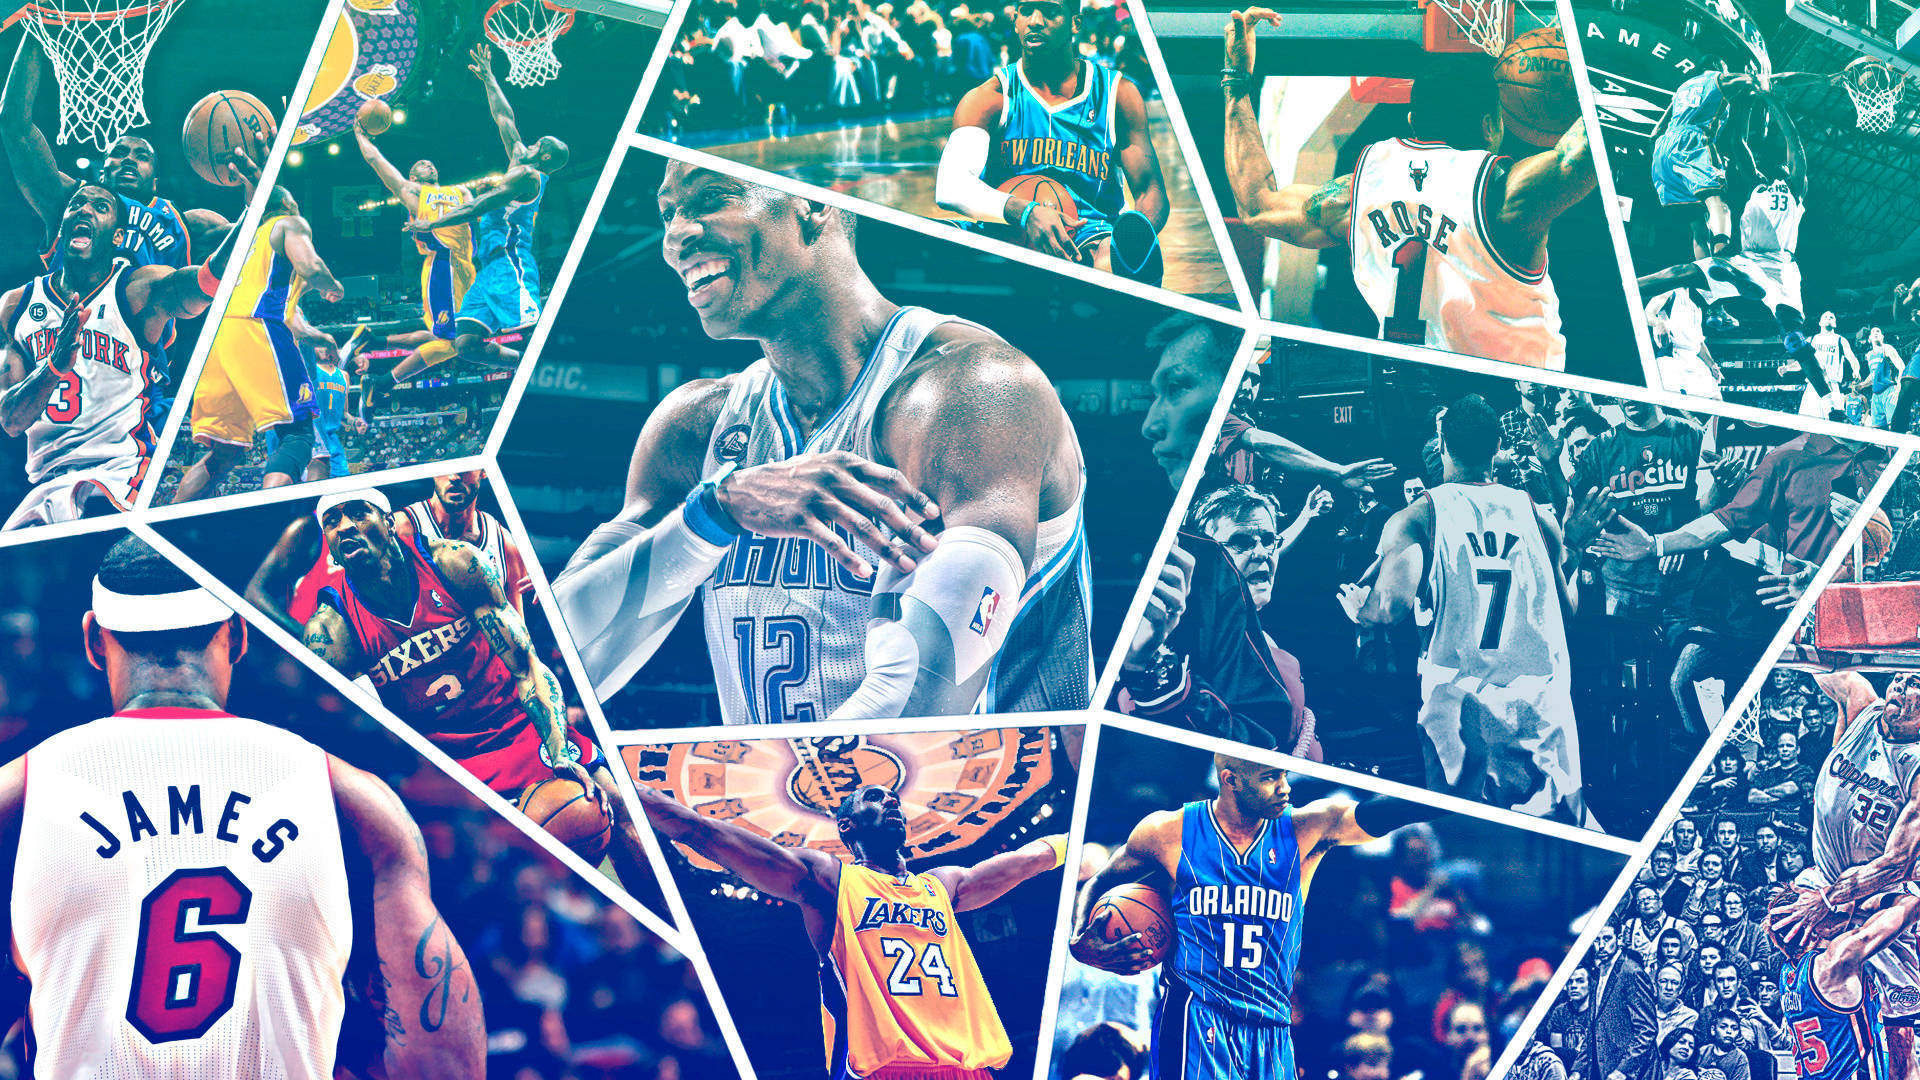 "The Best Basketball Player Looking to Dominate On the Court" Wallpaper